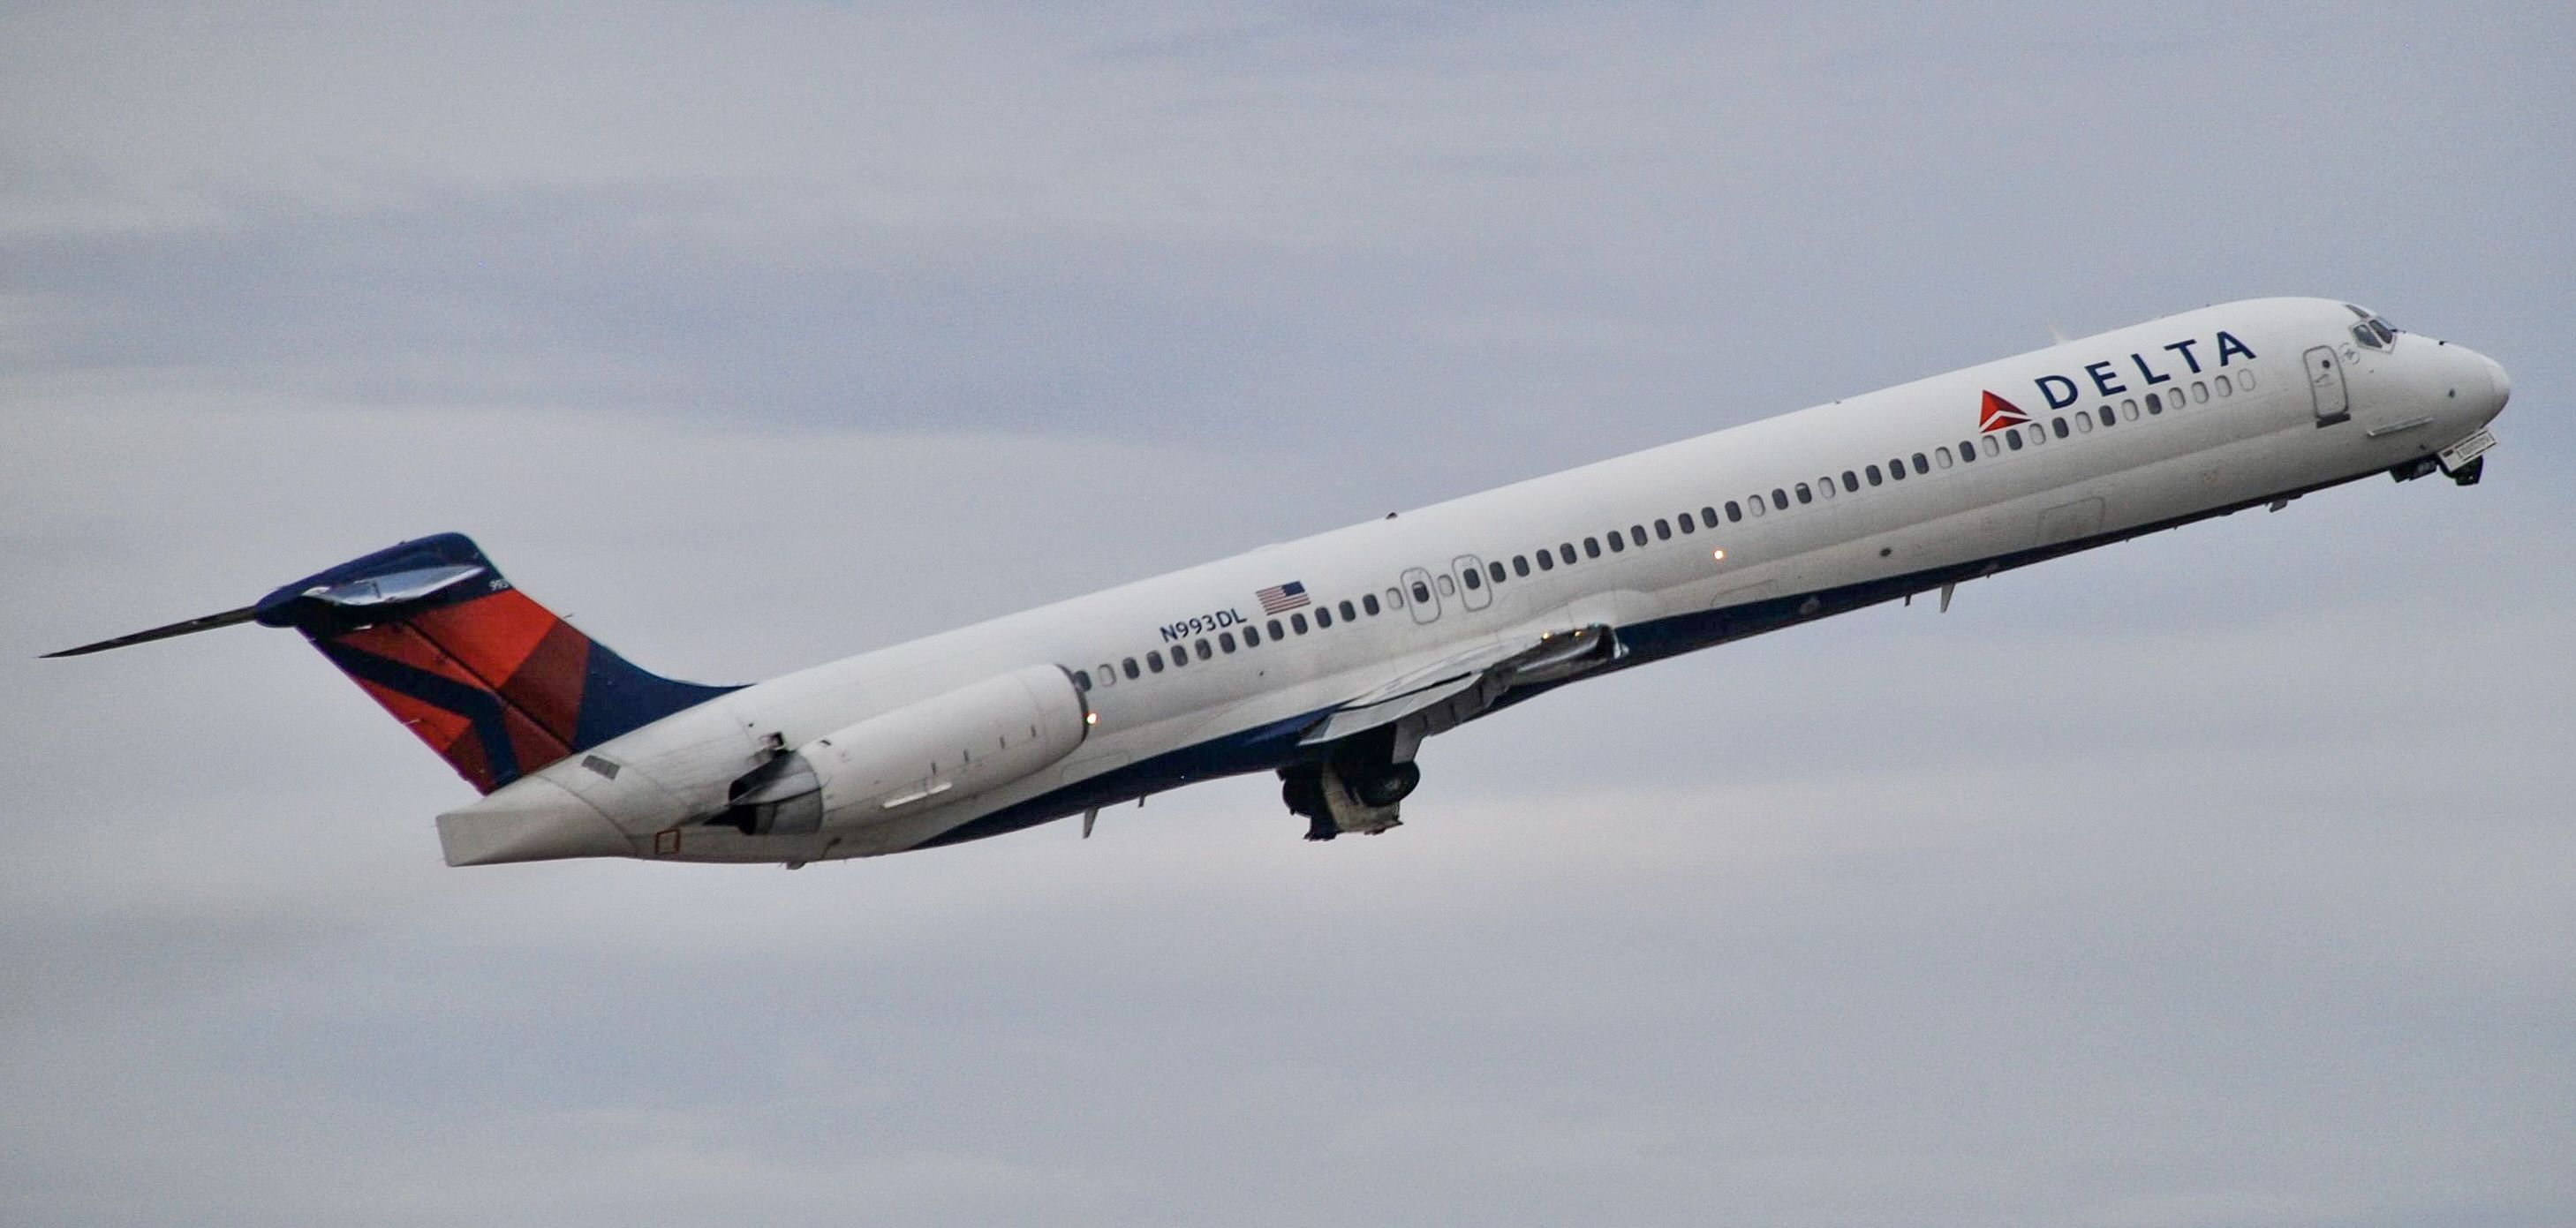 McDonnell Douglas MD-88 (N993DL) - A Delta MD-88 taking off on a cold and gray afternoon.  Taken back in 2016.